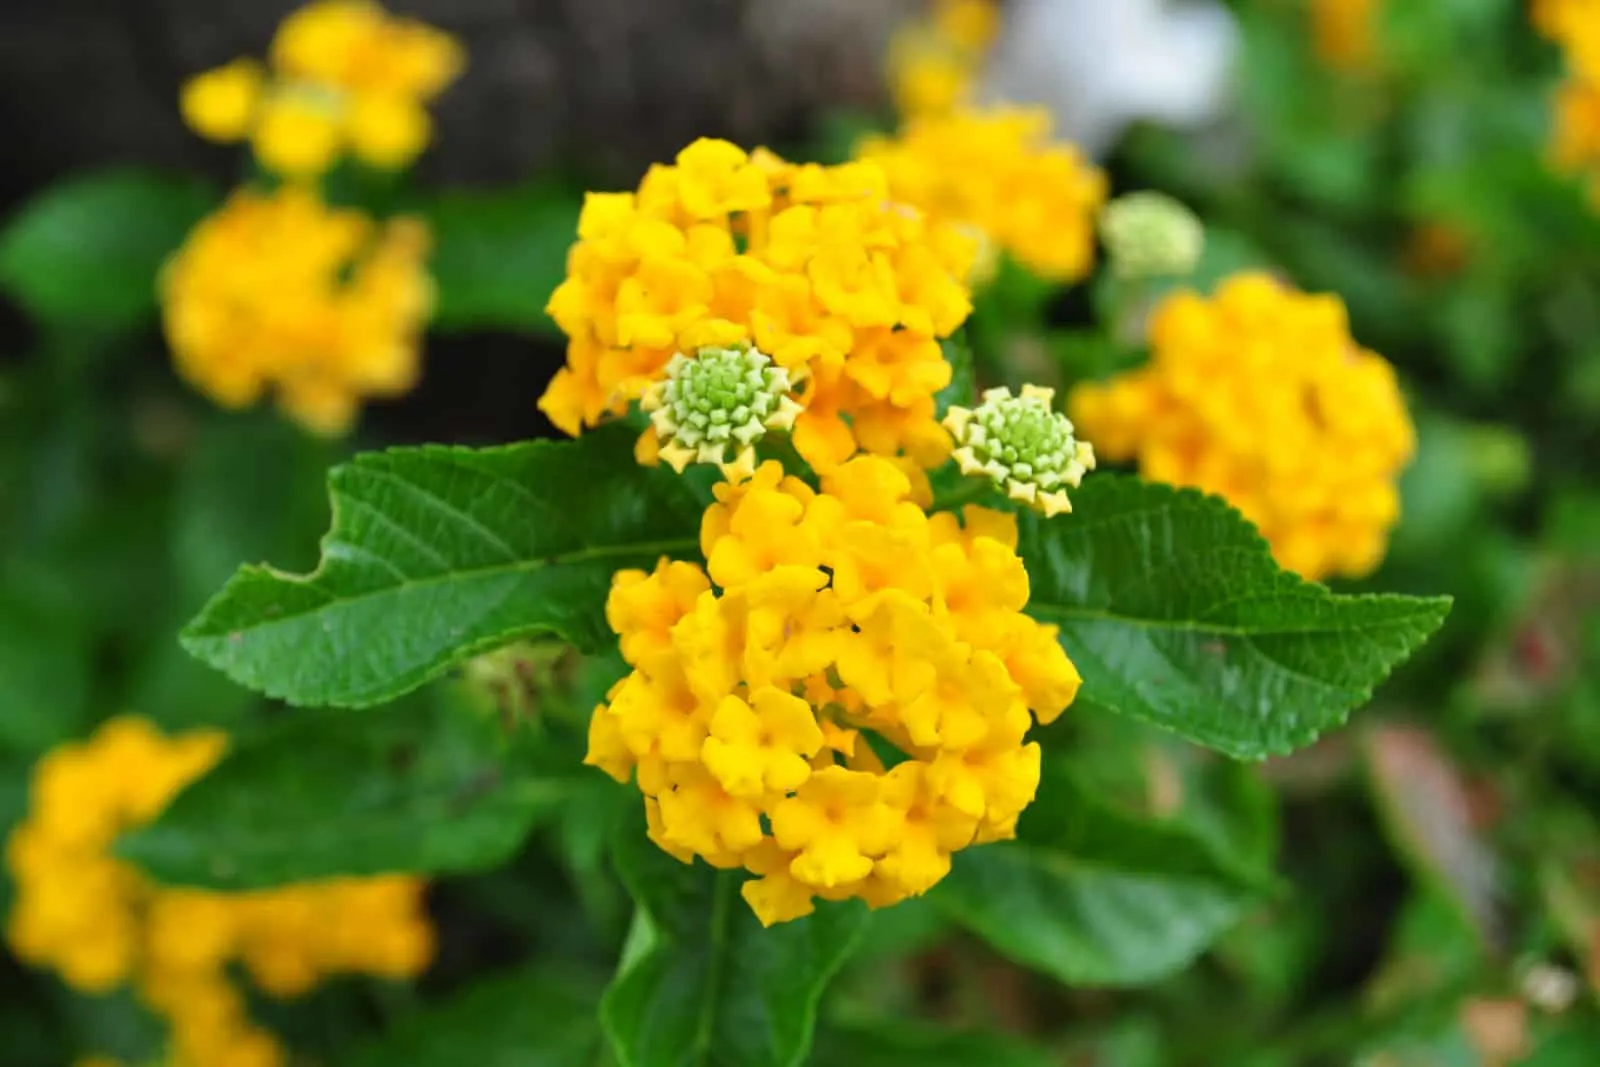 30 Weeds With Small Yellow Flowers And Tips To Eradicate Them